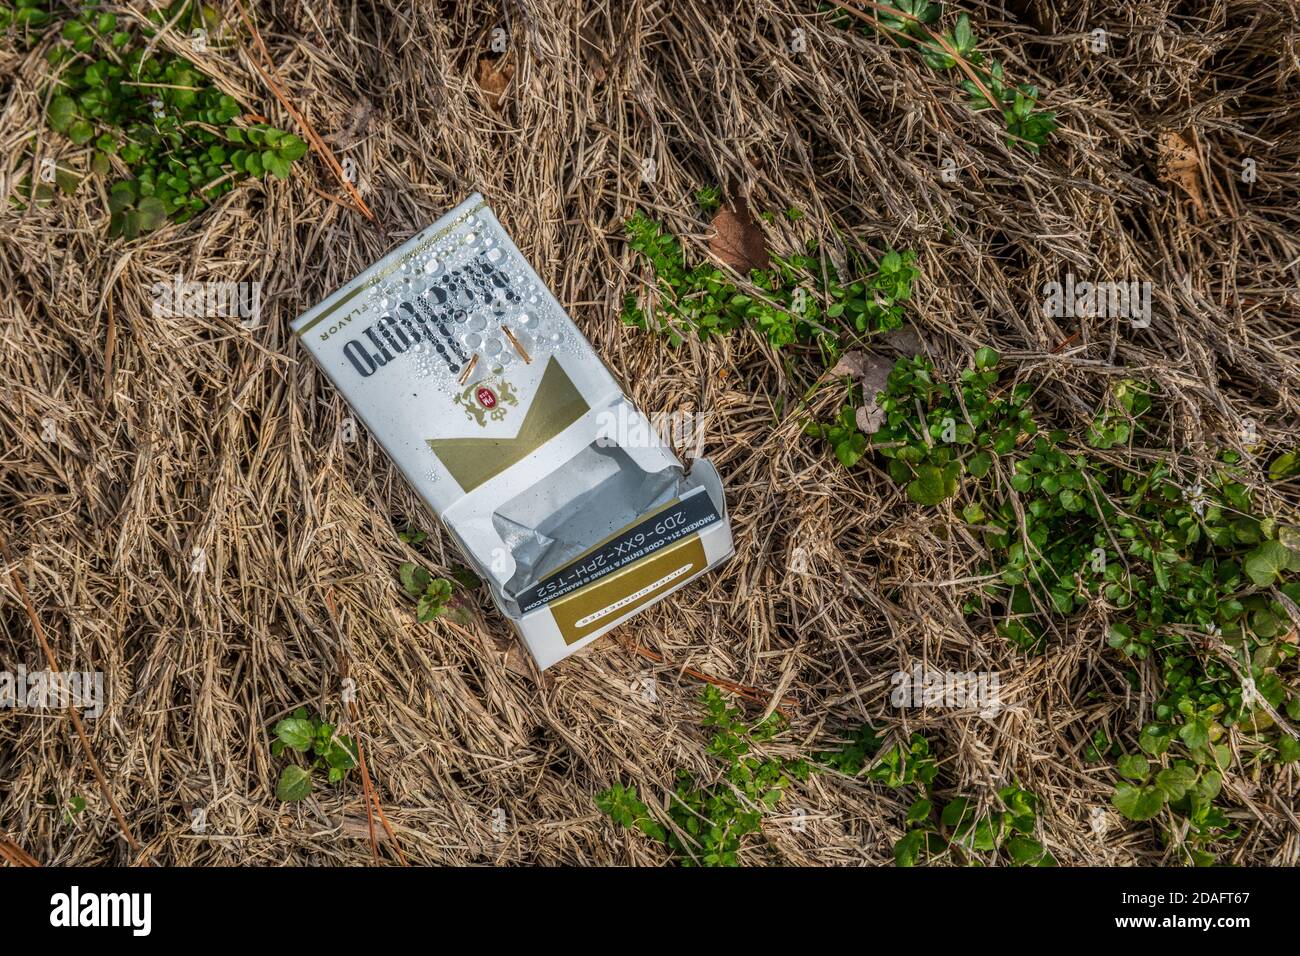 Empty pack of Marlboro cigarette box laying on the ground carelessly discarded polluting the environment outdoors copy space Stock Photo